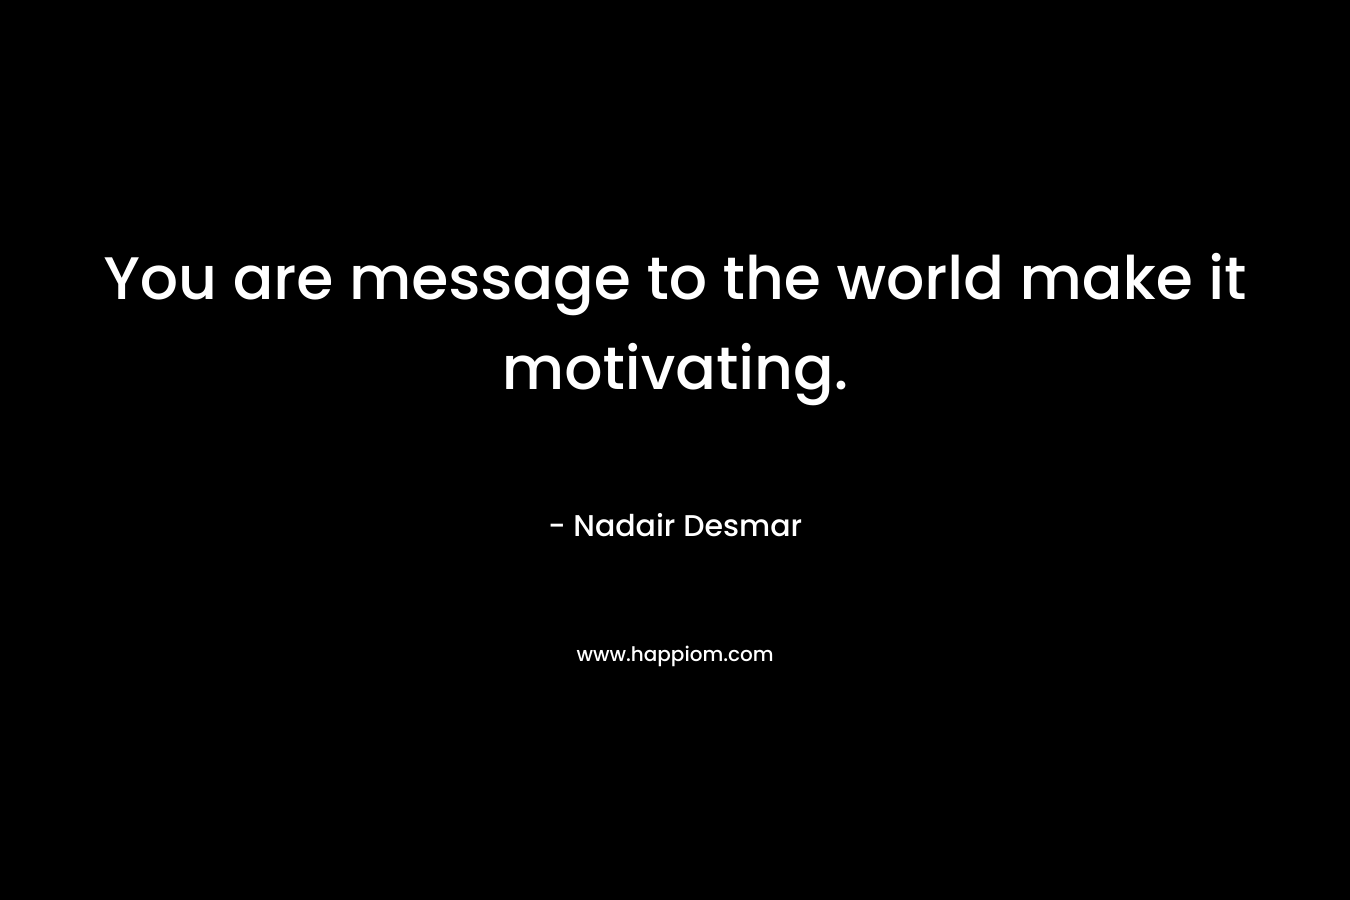 You are message to the world make it motivating.